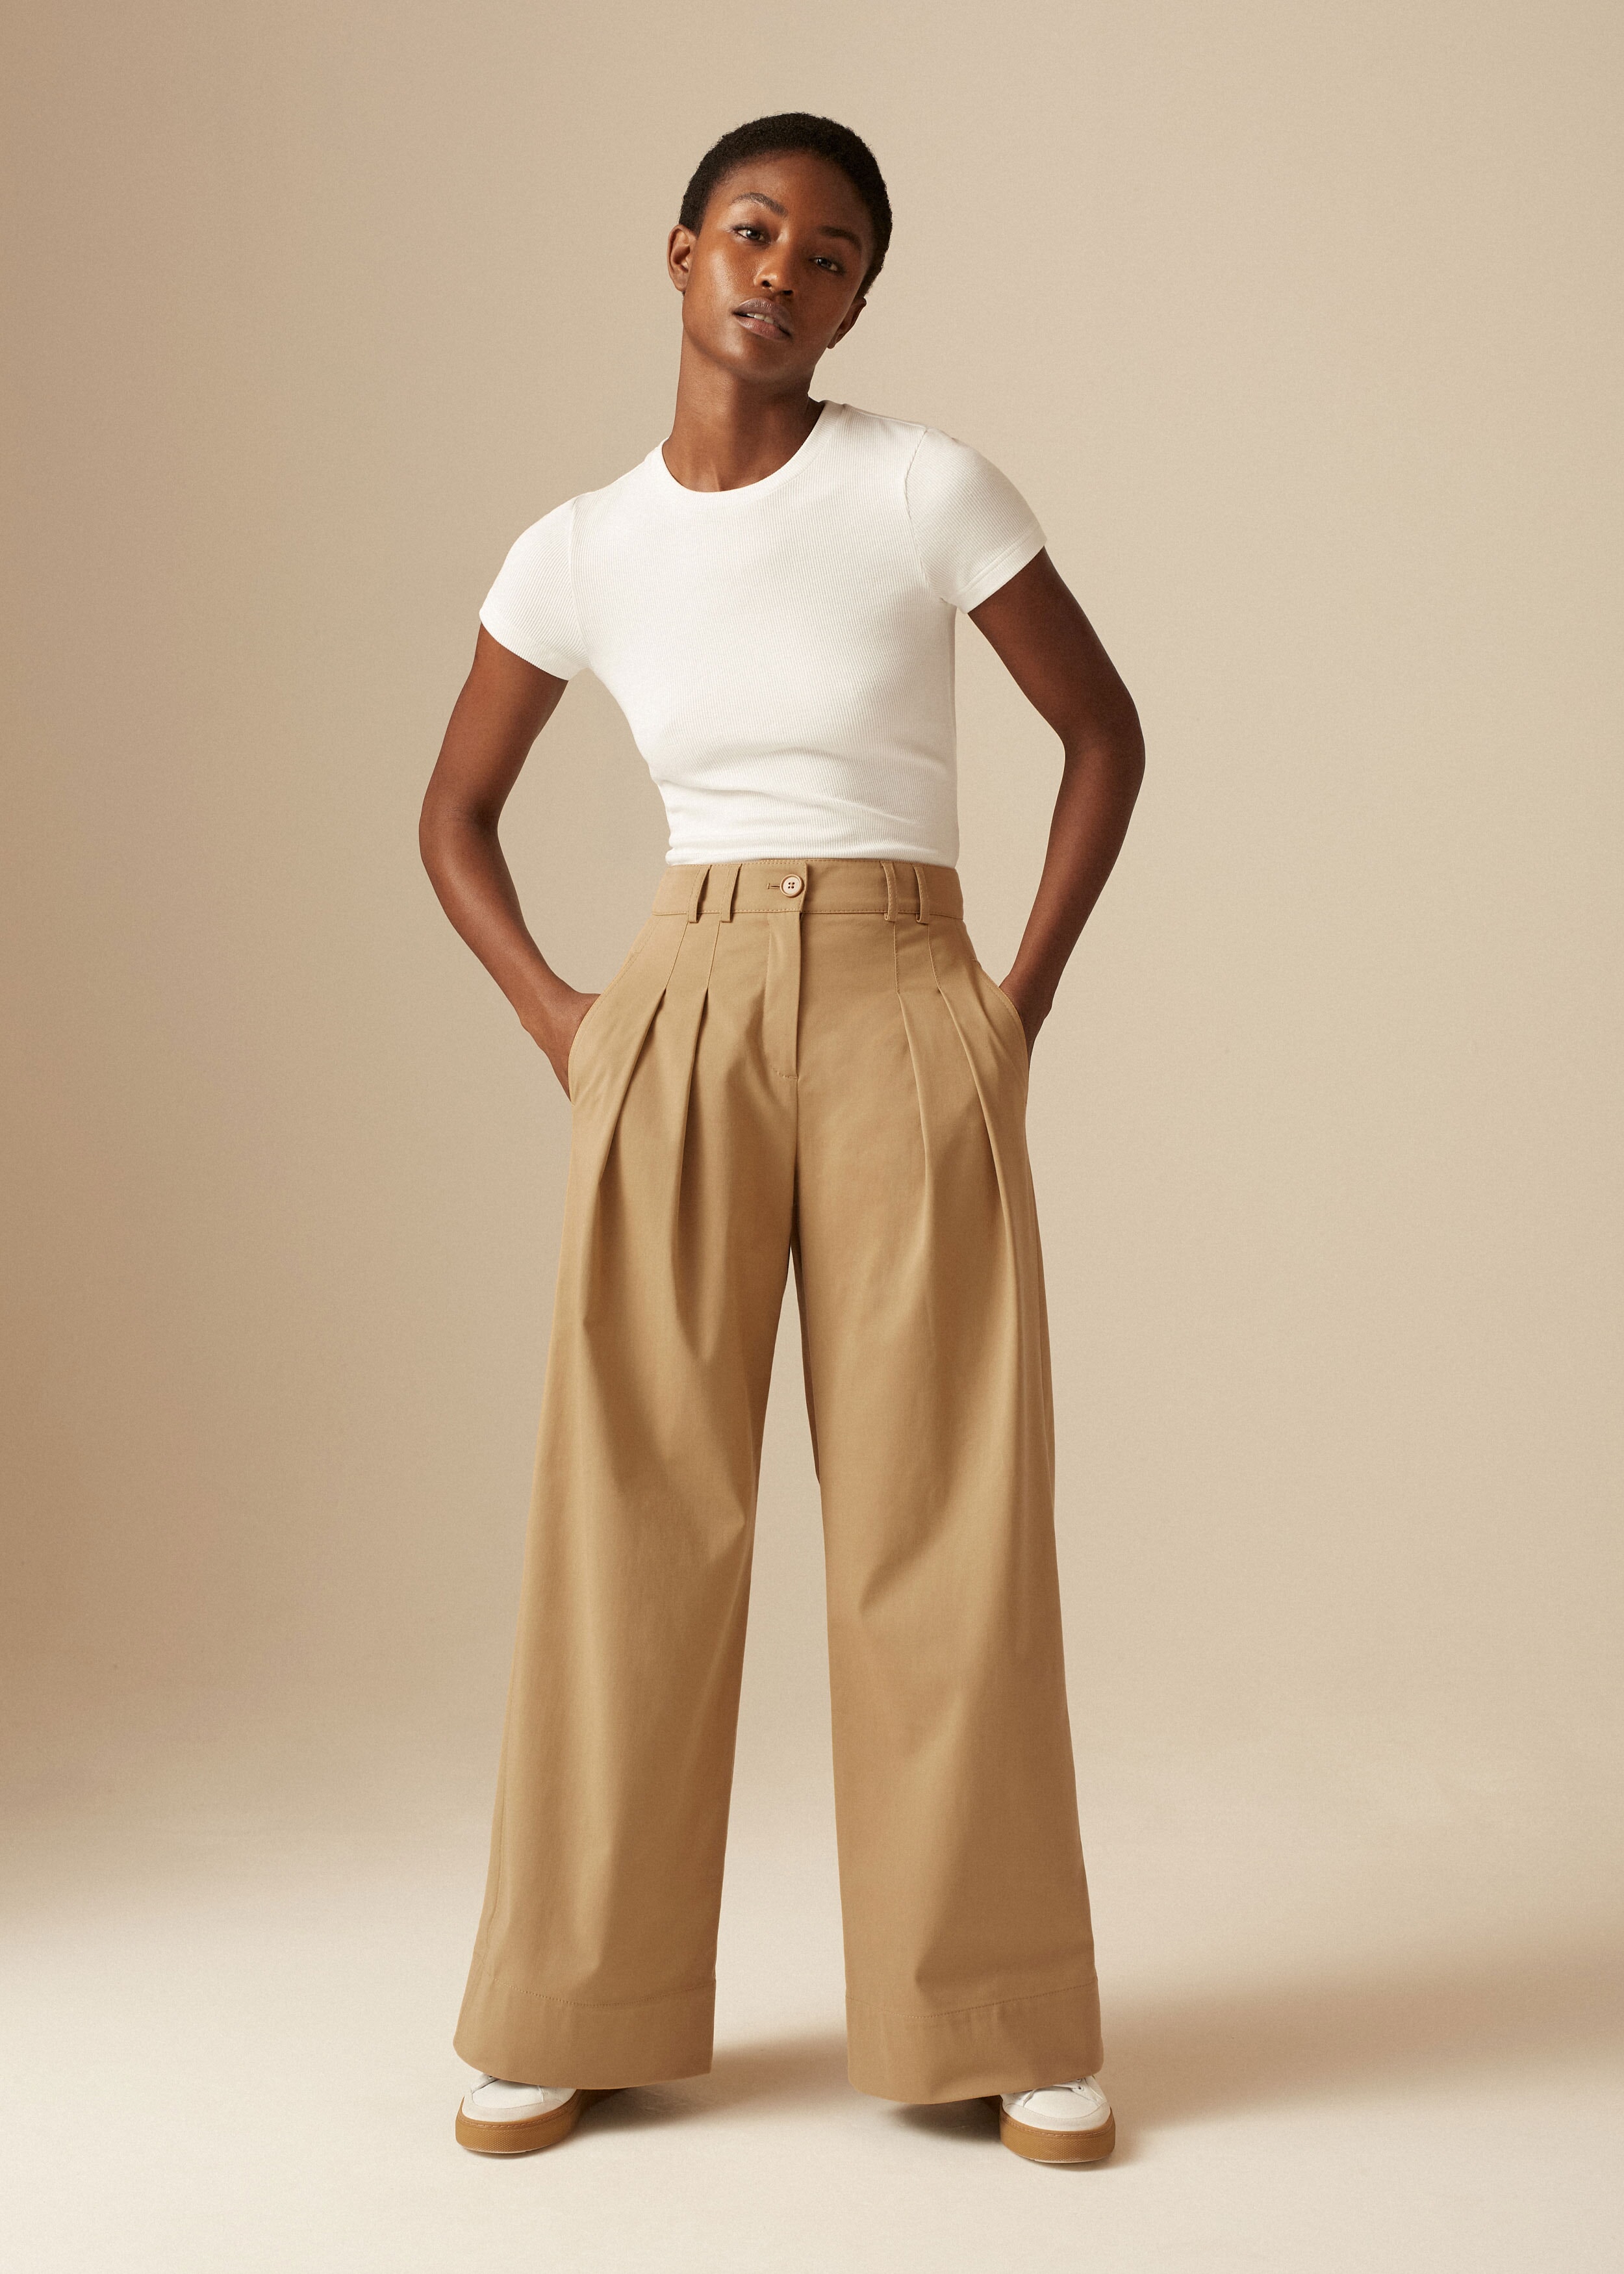 Solid Color Women's Palazzo Pants in Light Brown PP0304 130000 12